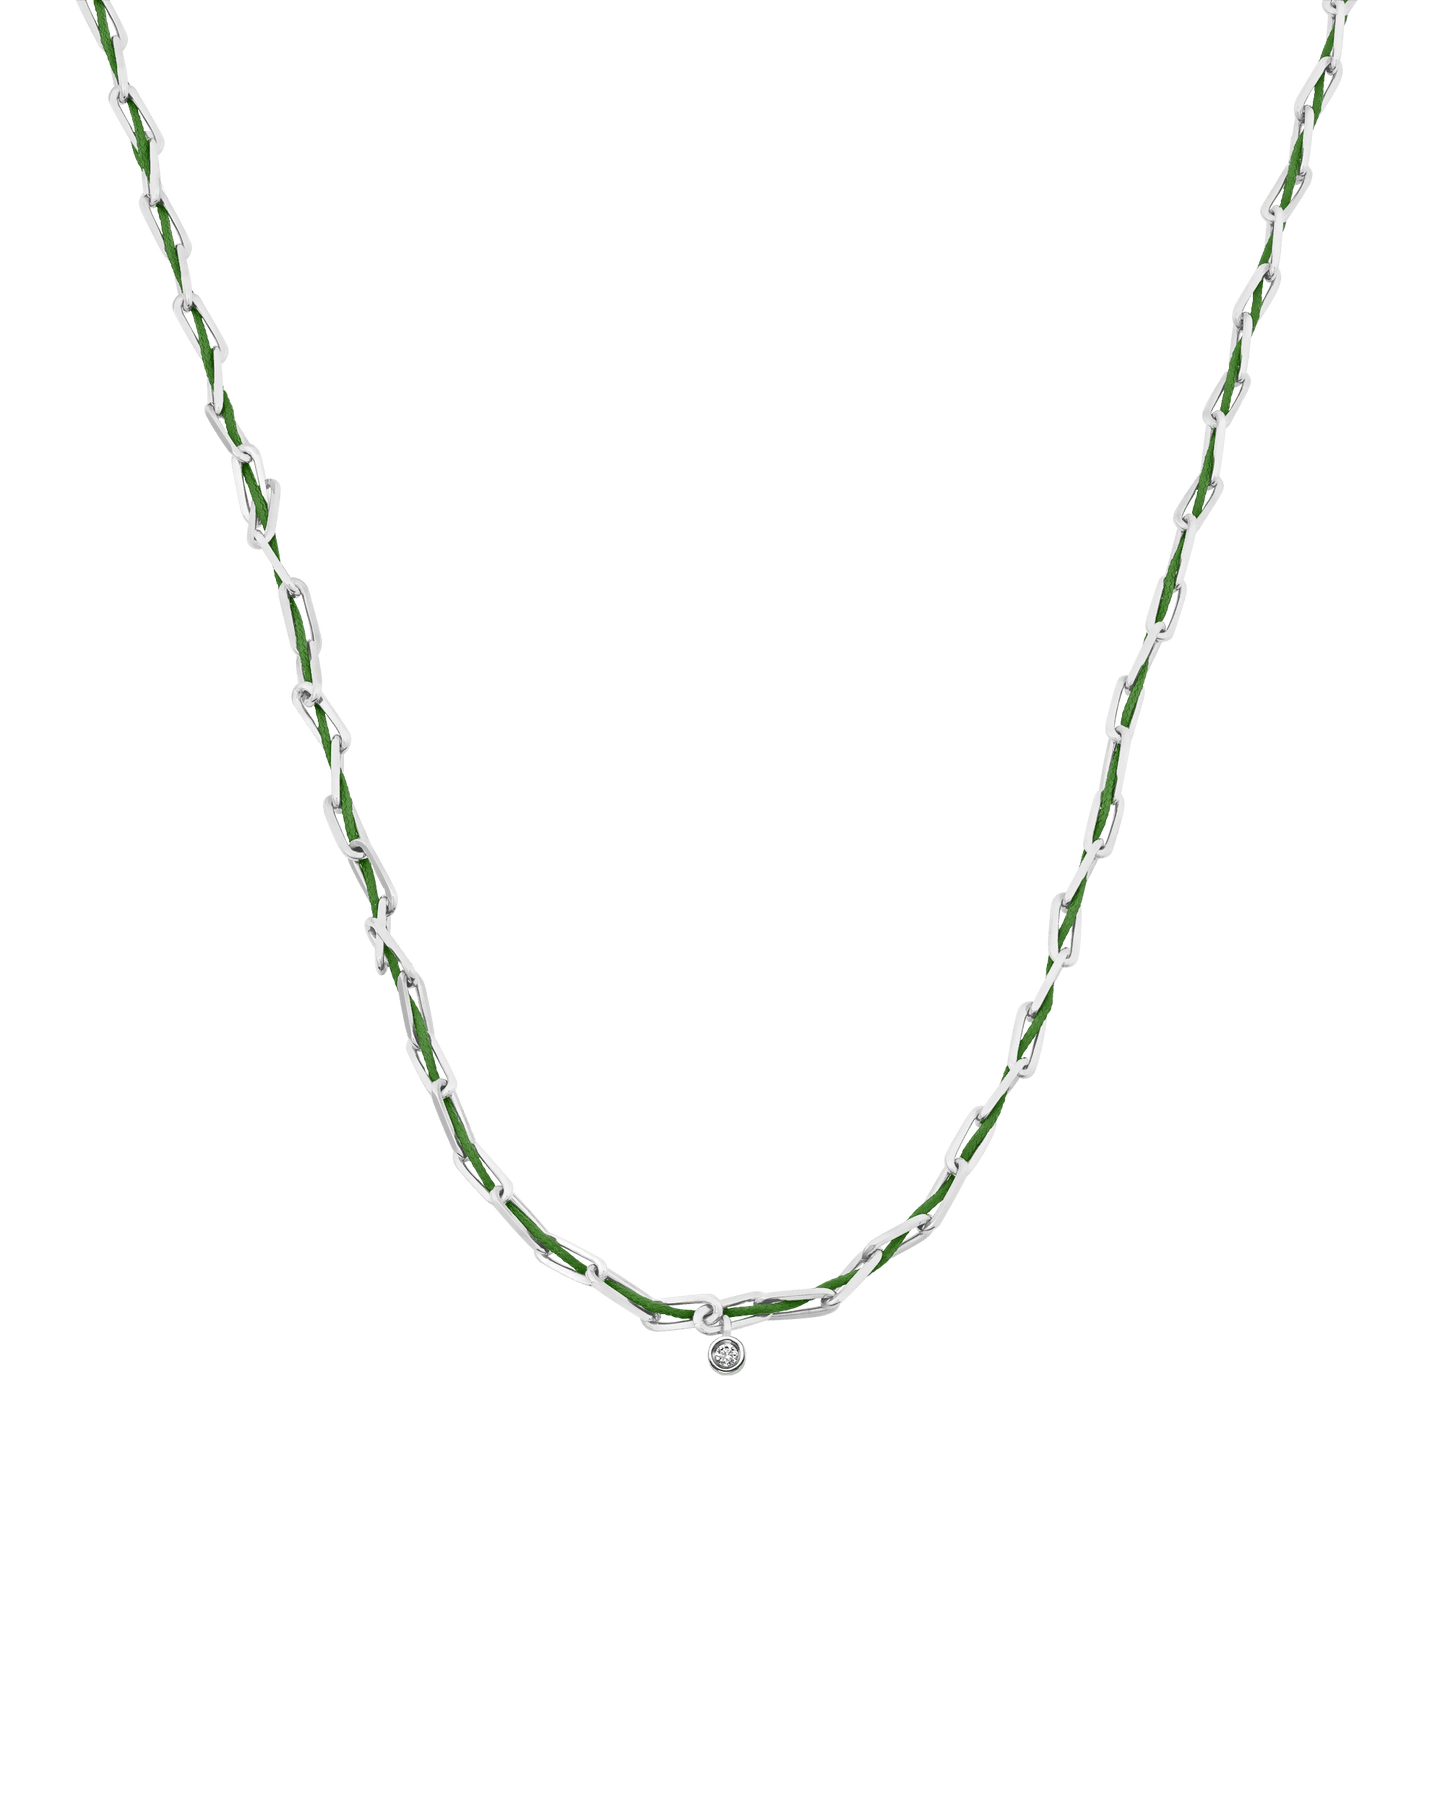 Twine Diamond Necklace - 925 Sterling Silver Necklaces magal-dev Mint Small: 0.03ct 16"